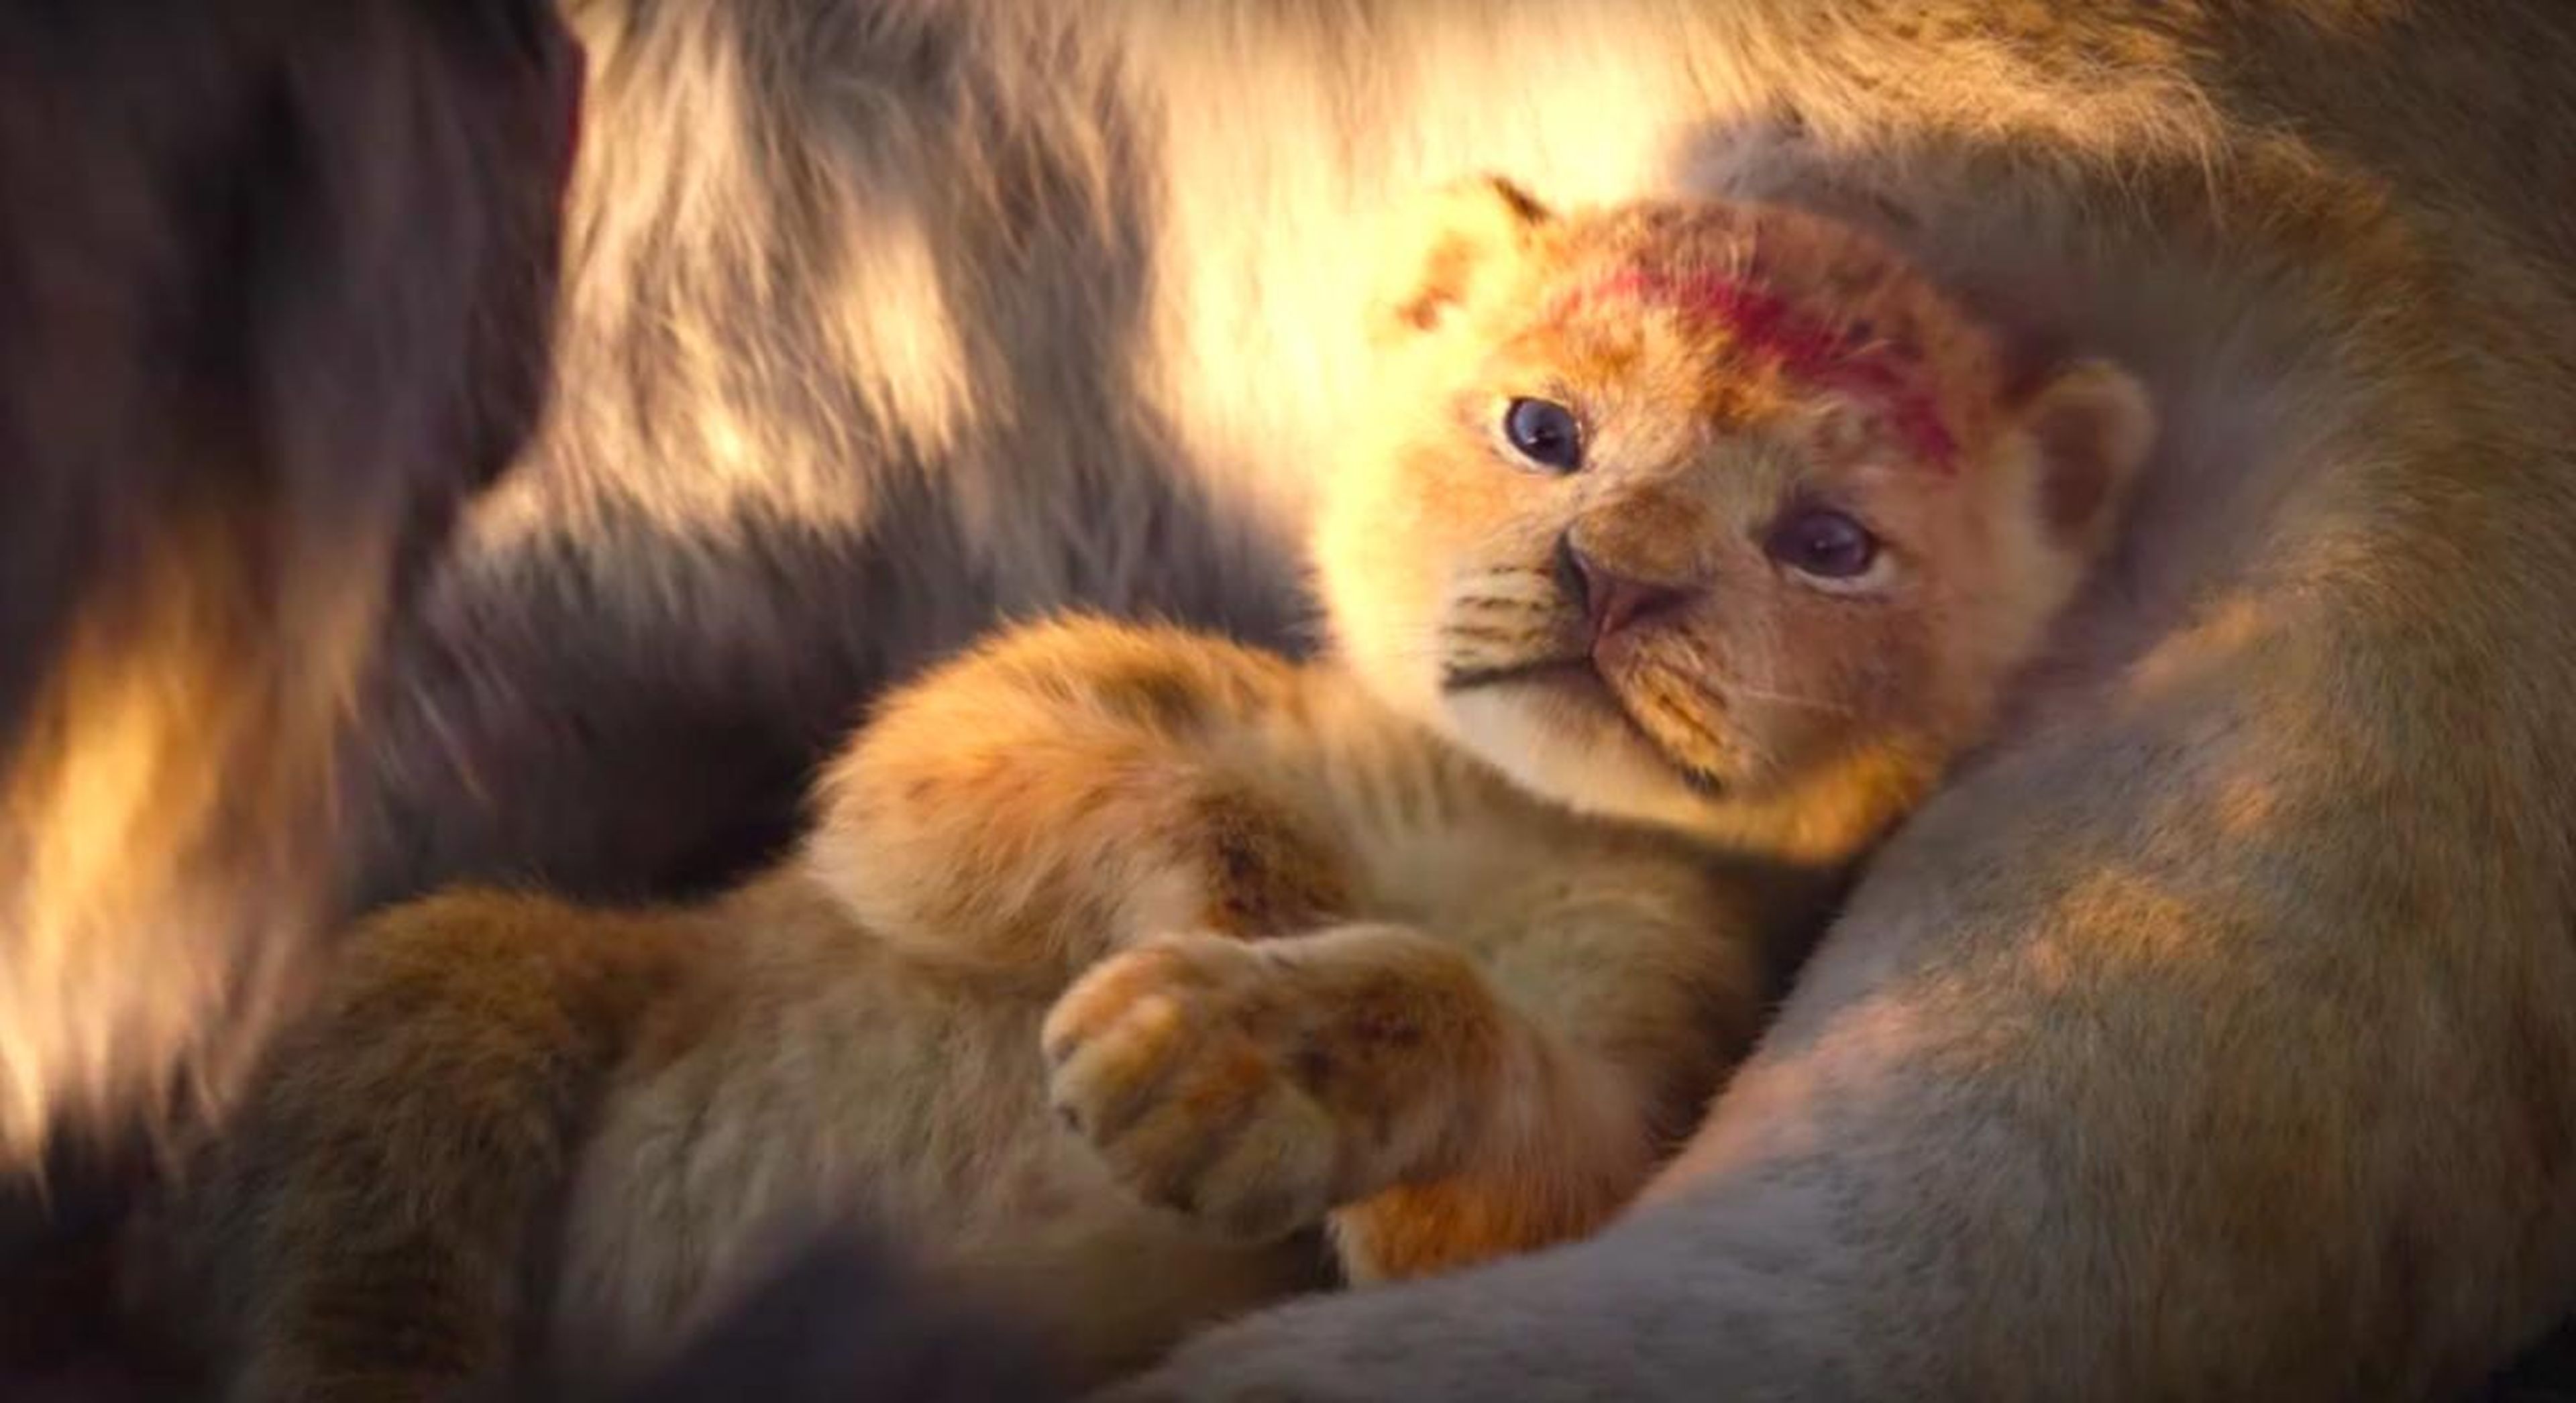 Simba is shown in a new teaser for "The Lion King" remake.